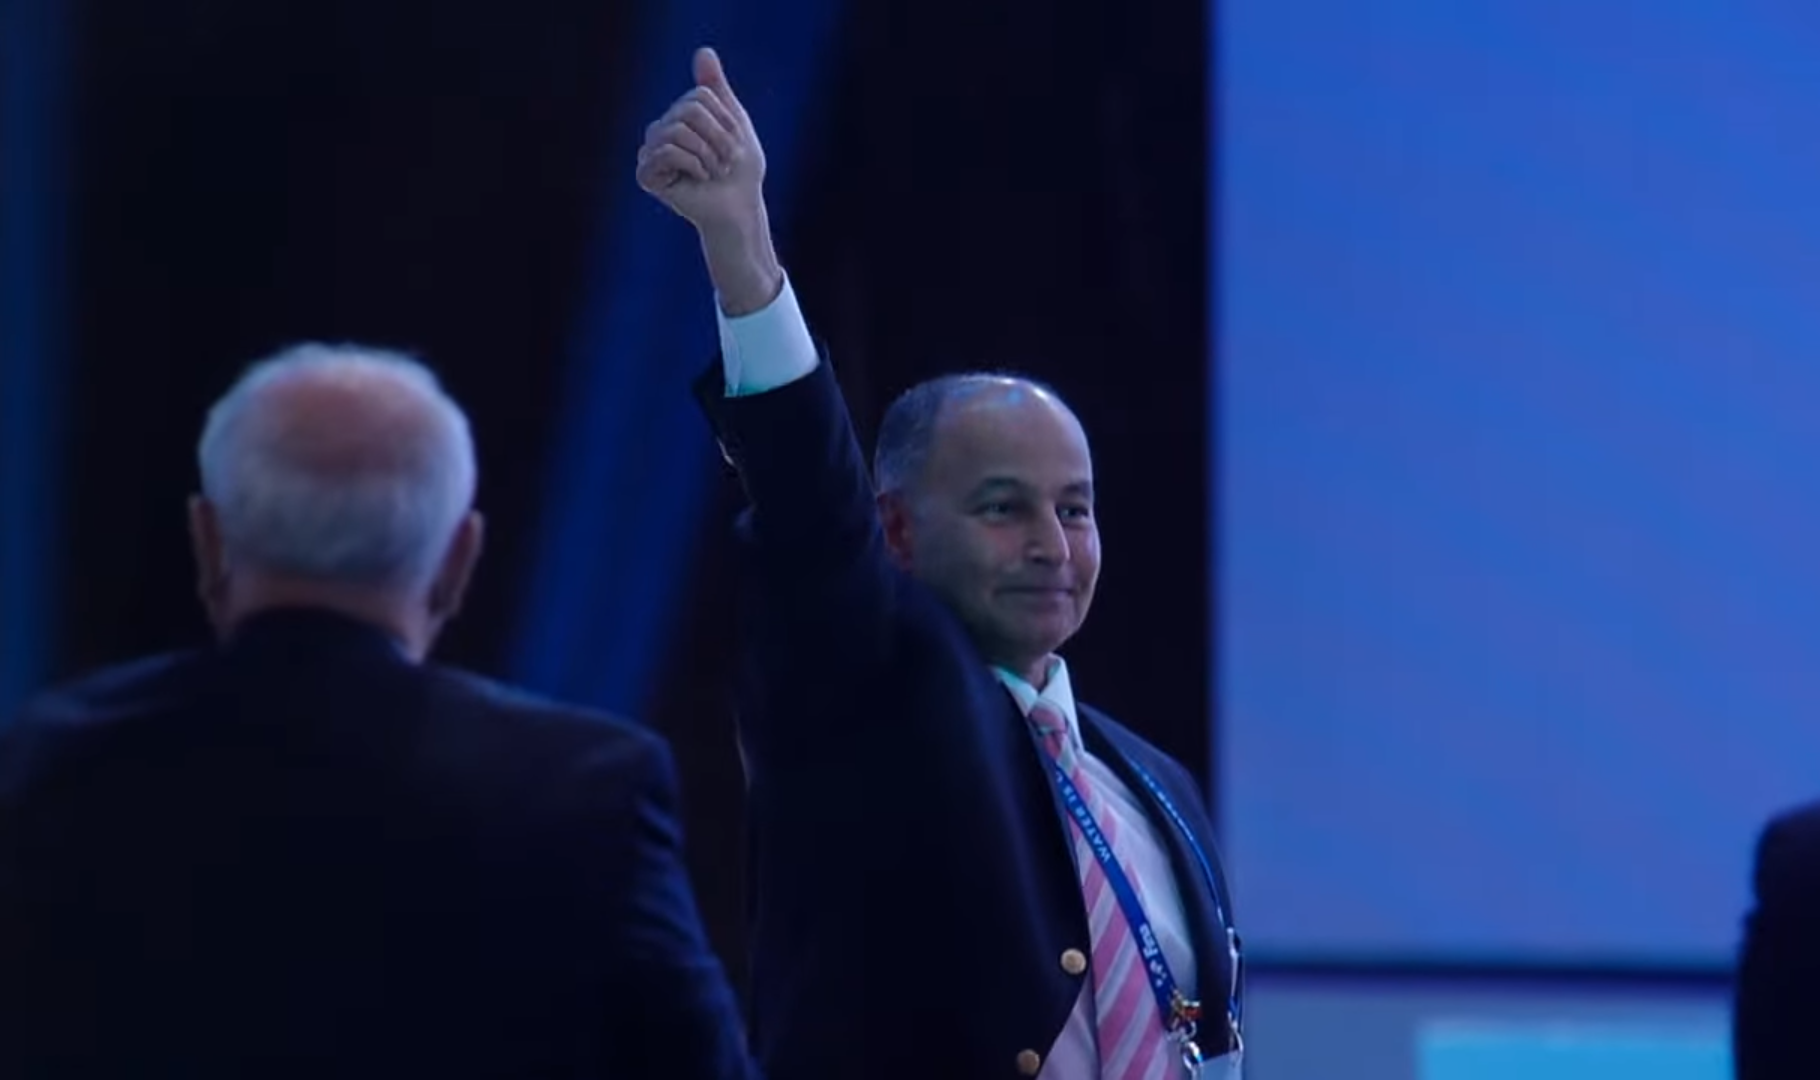 Husain Al-Musallam celebrates after being elected as President of FINA ©FINA